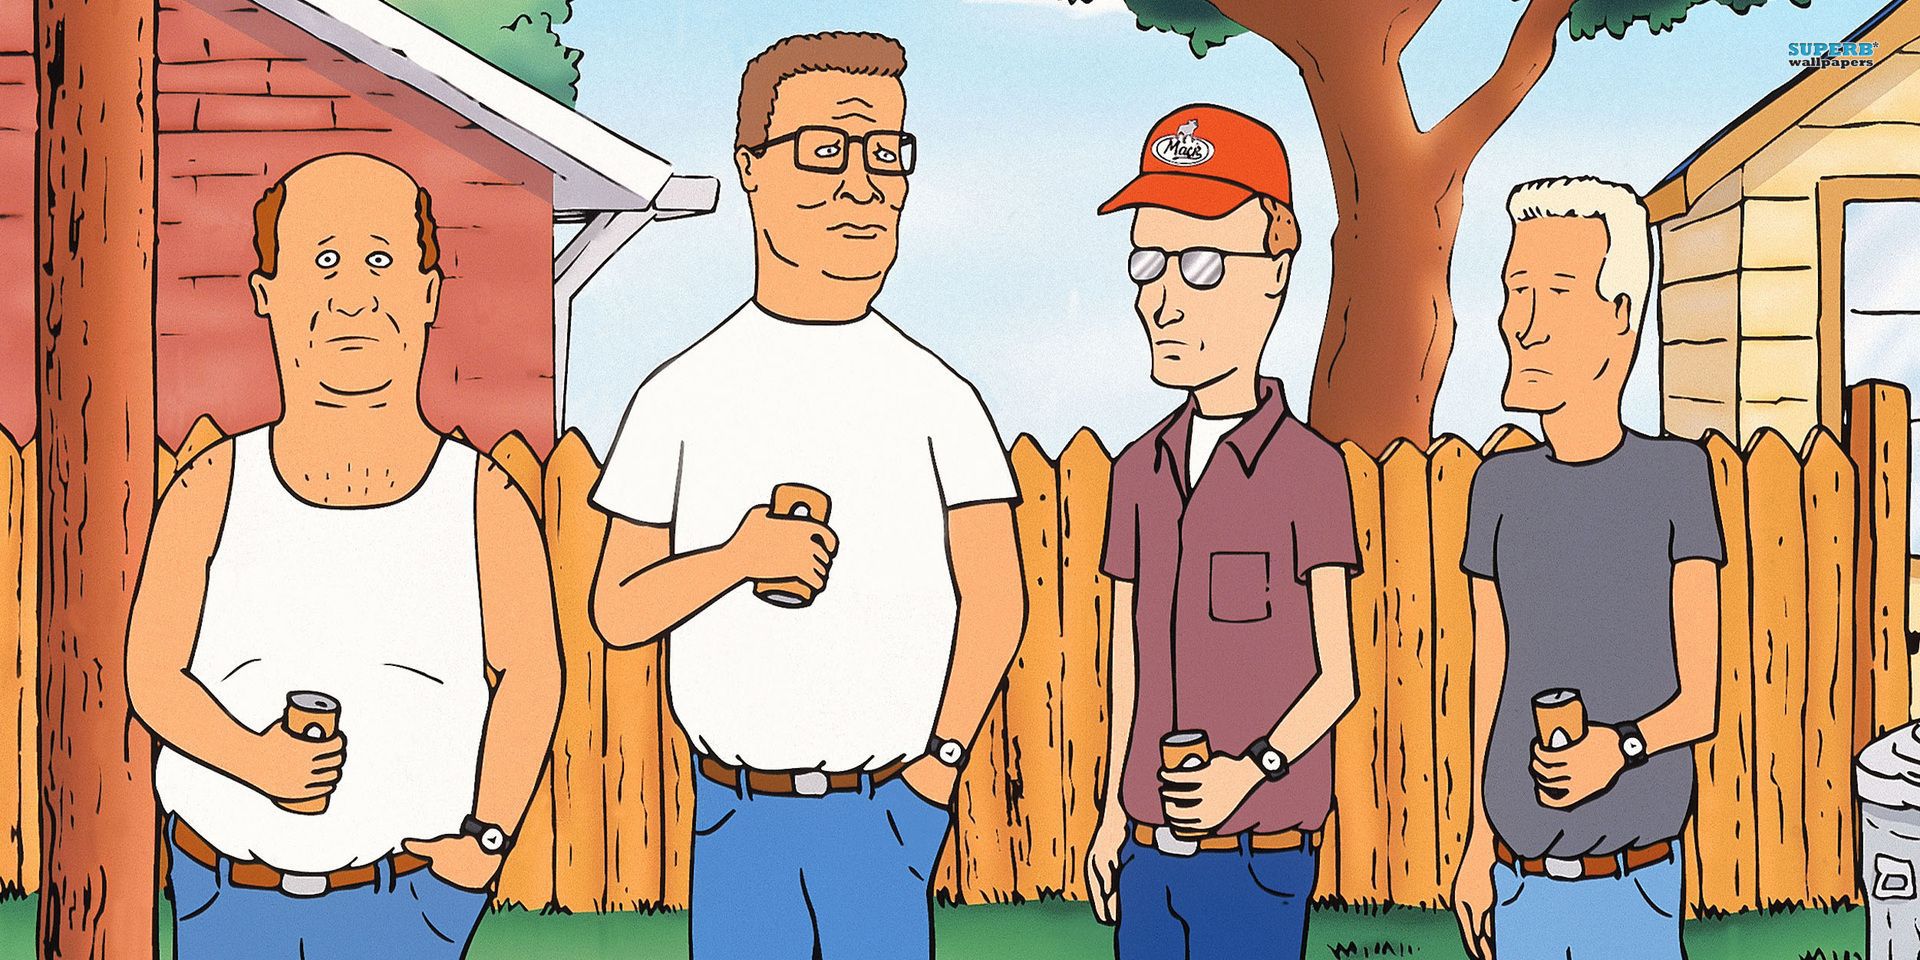 5 Reasons Beavis And Butthead Is Mike Judges Best Show (& 5 Why Its King Of The Hill)